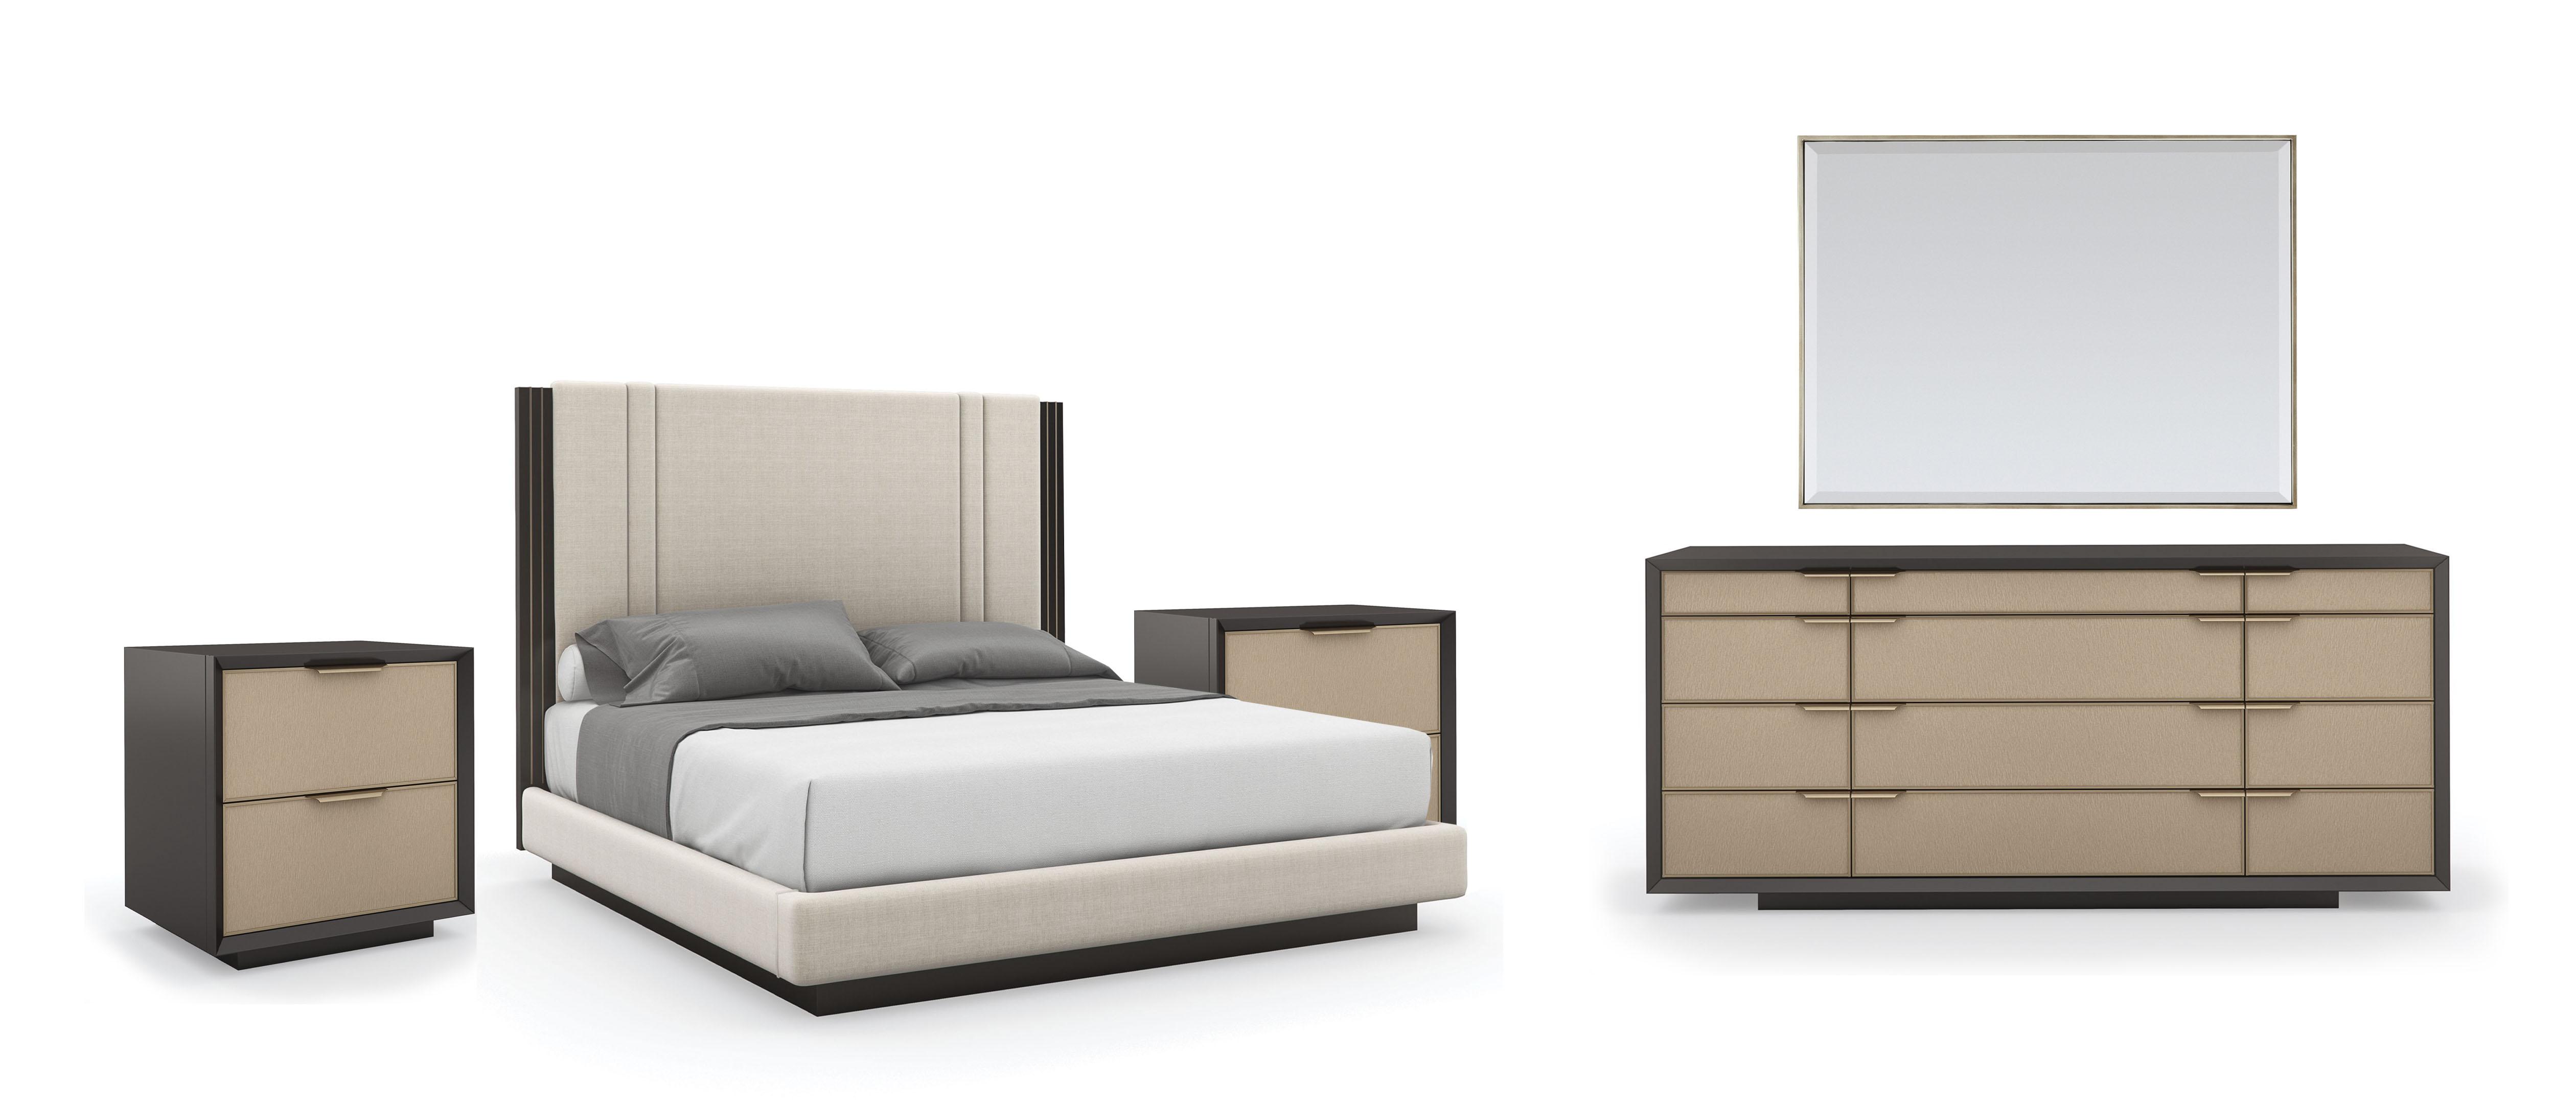 Contemporary Platform Bed Set DECENT PROPOSAL / DOUBLE WRAP / ALL WRAPPED UP / REMIX RECTANGLE MIRROR CLA-020-105-Set-5 in Light Gray Fabric